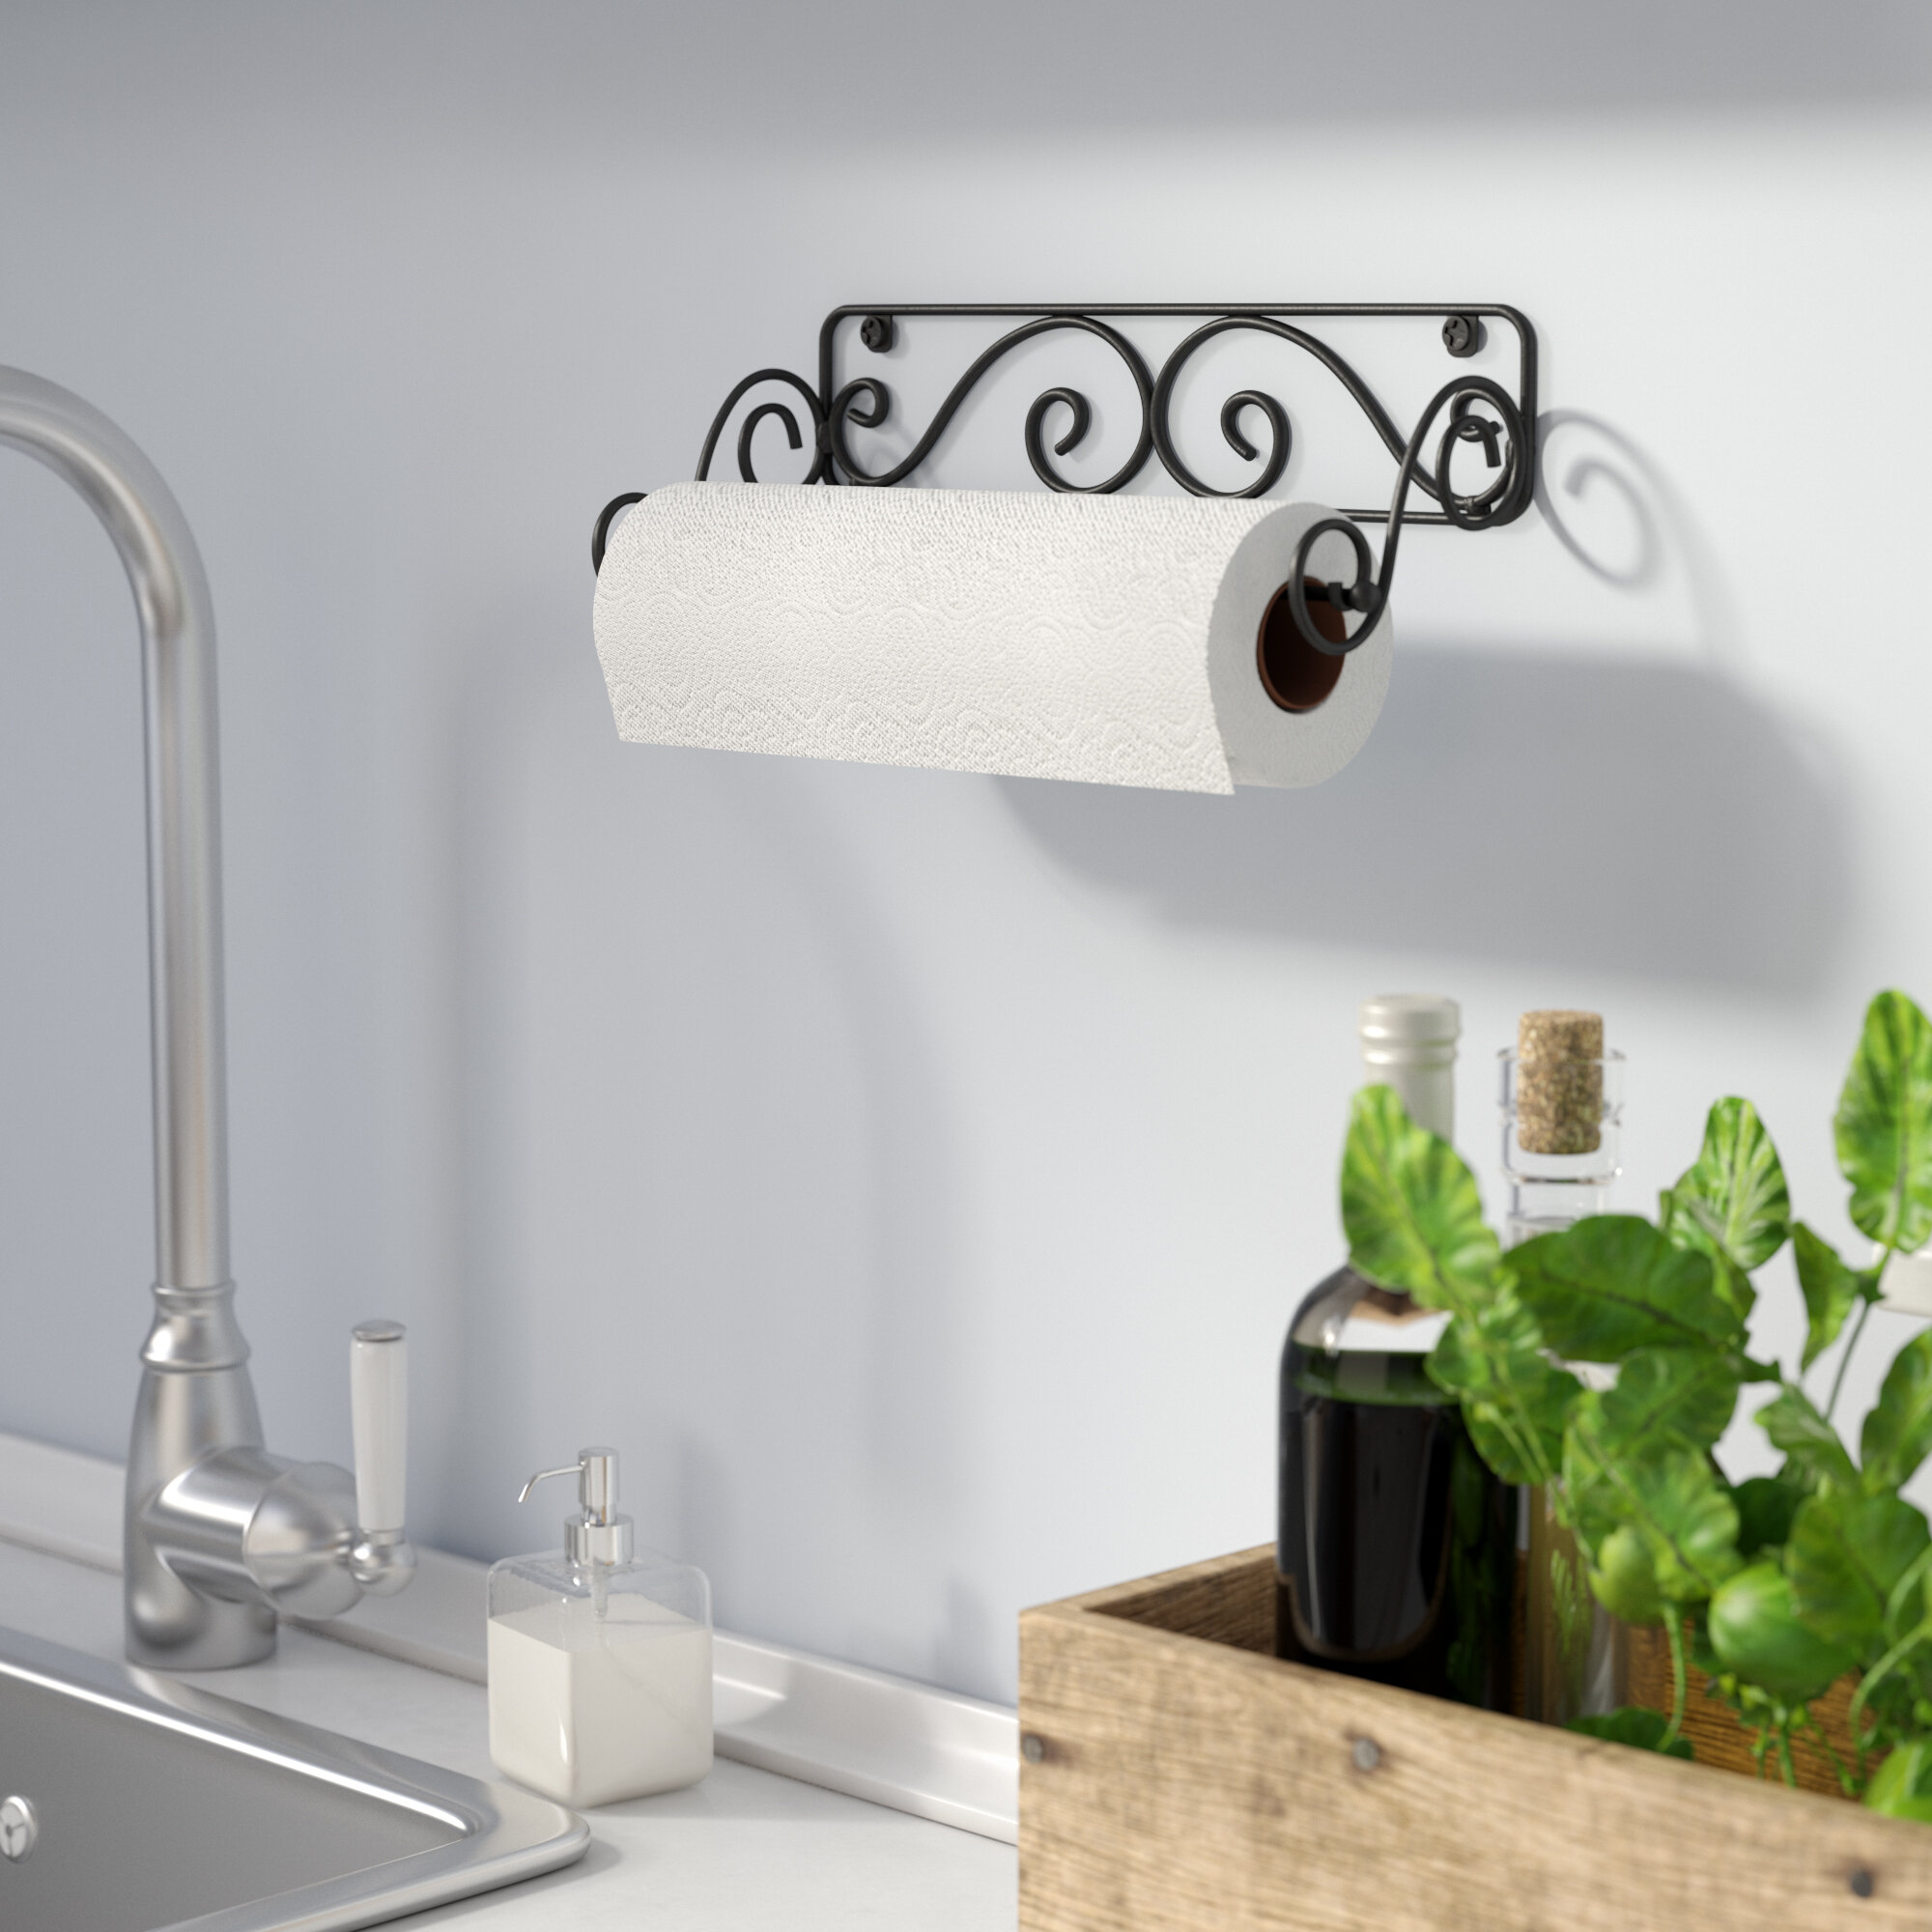 or Wall Mounted Paper Towel Holder Made of Steel mDesign Kitchen Roll Holder 